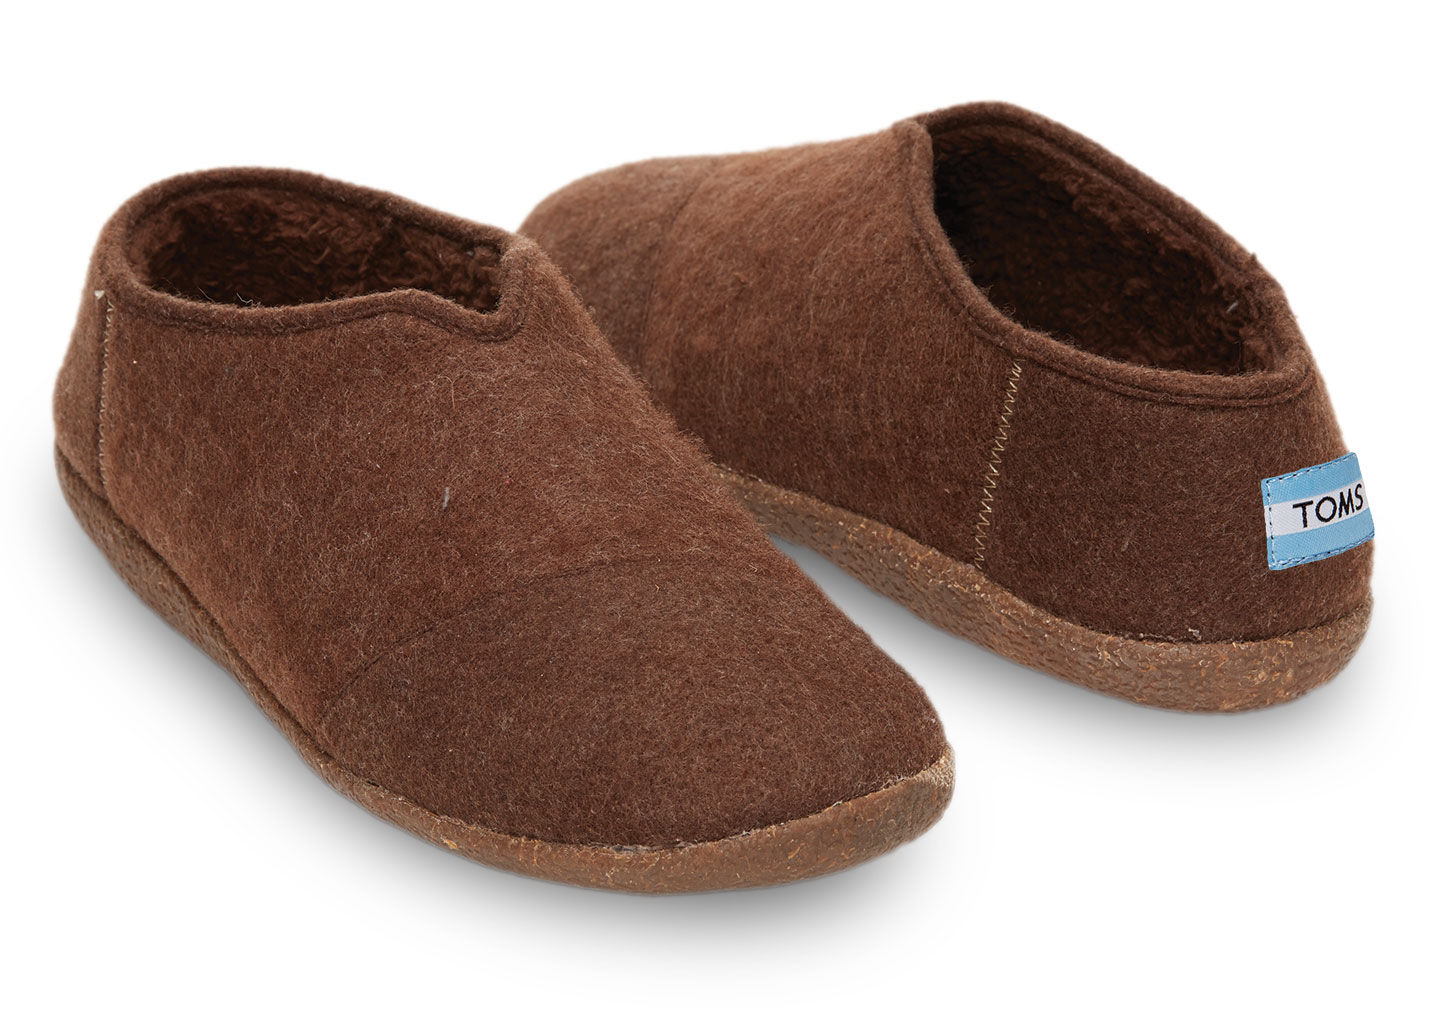 toms wool slippers